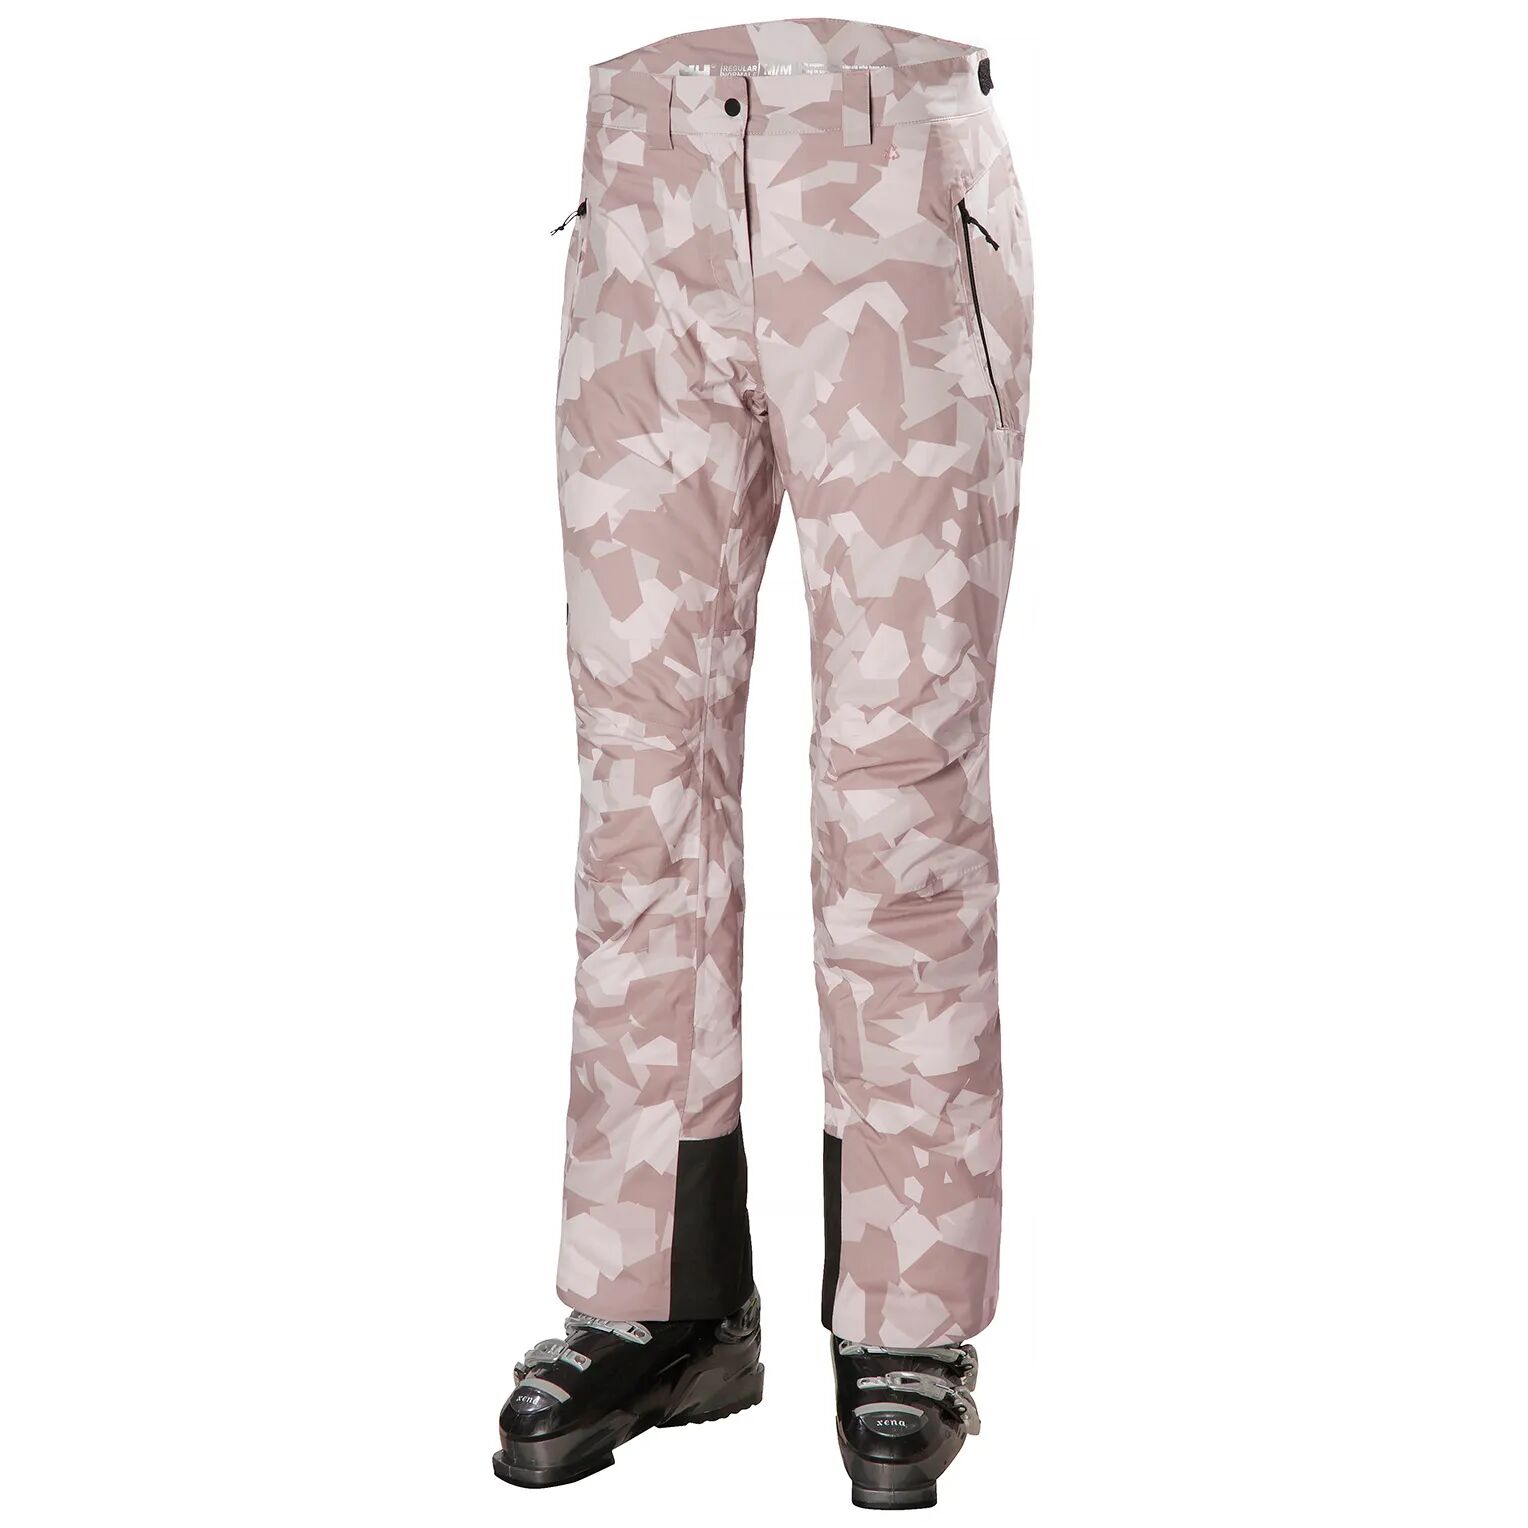 Helly Hansen Dame Snowstar Mono Material Trousers Skibukse Rosa S